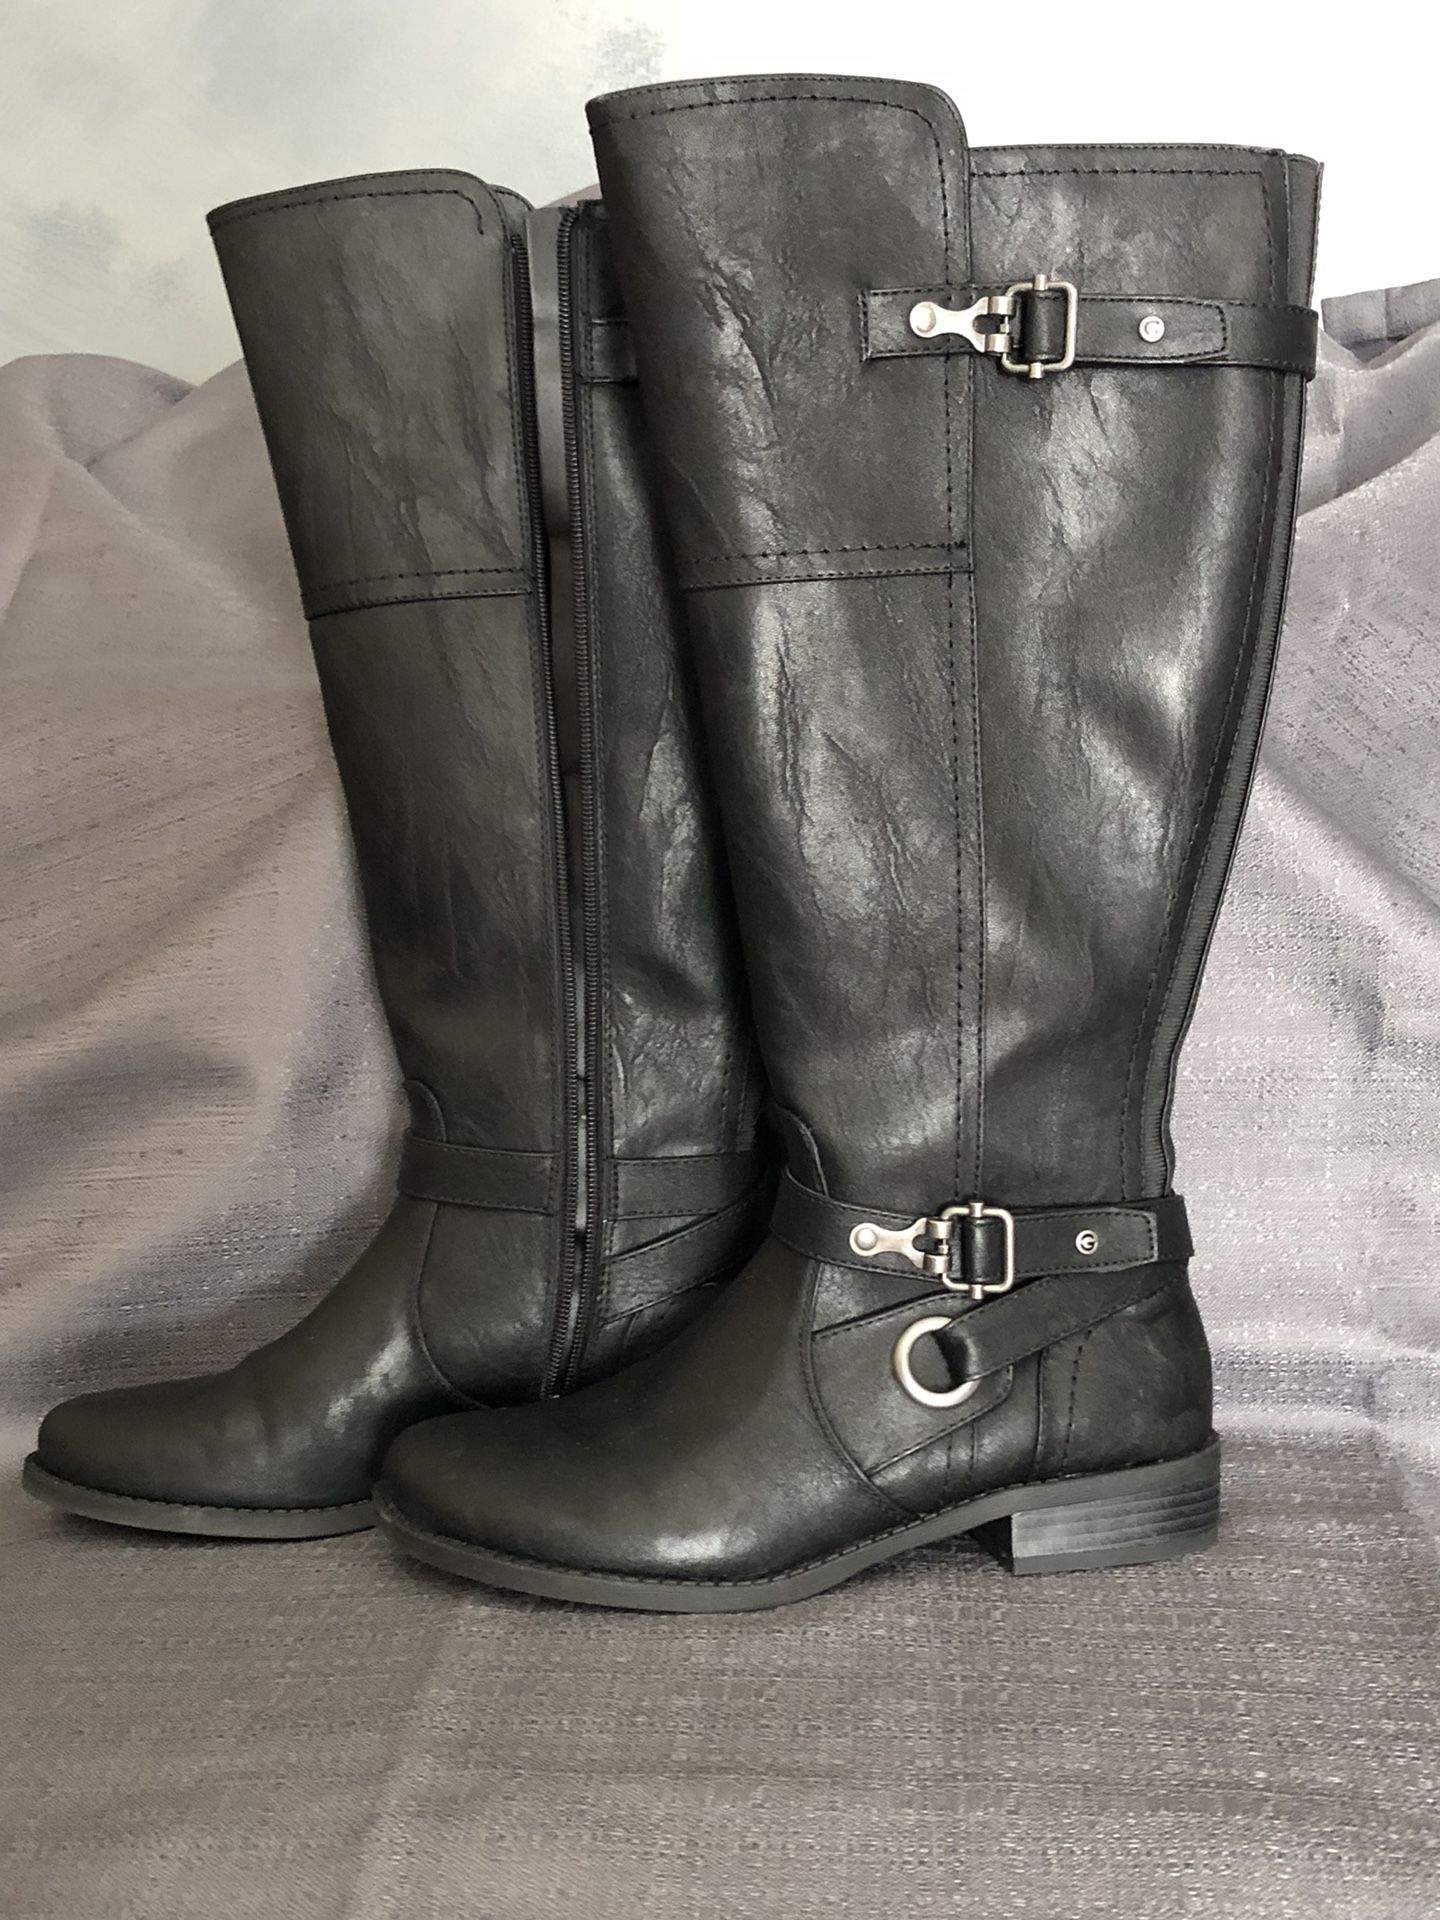 Guess Boots Size 8 - Wide Calf